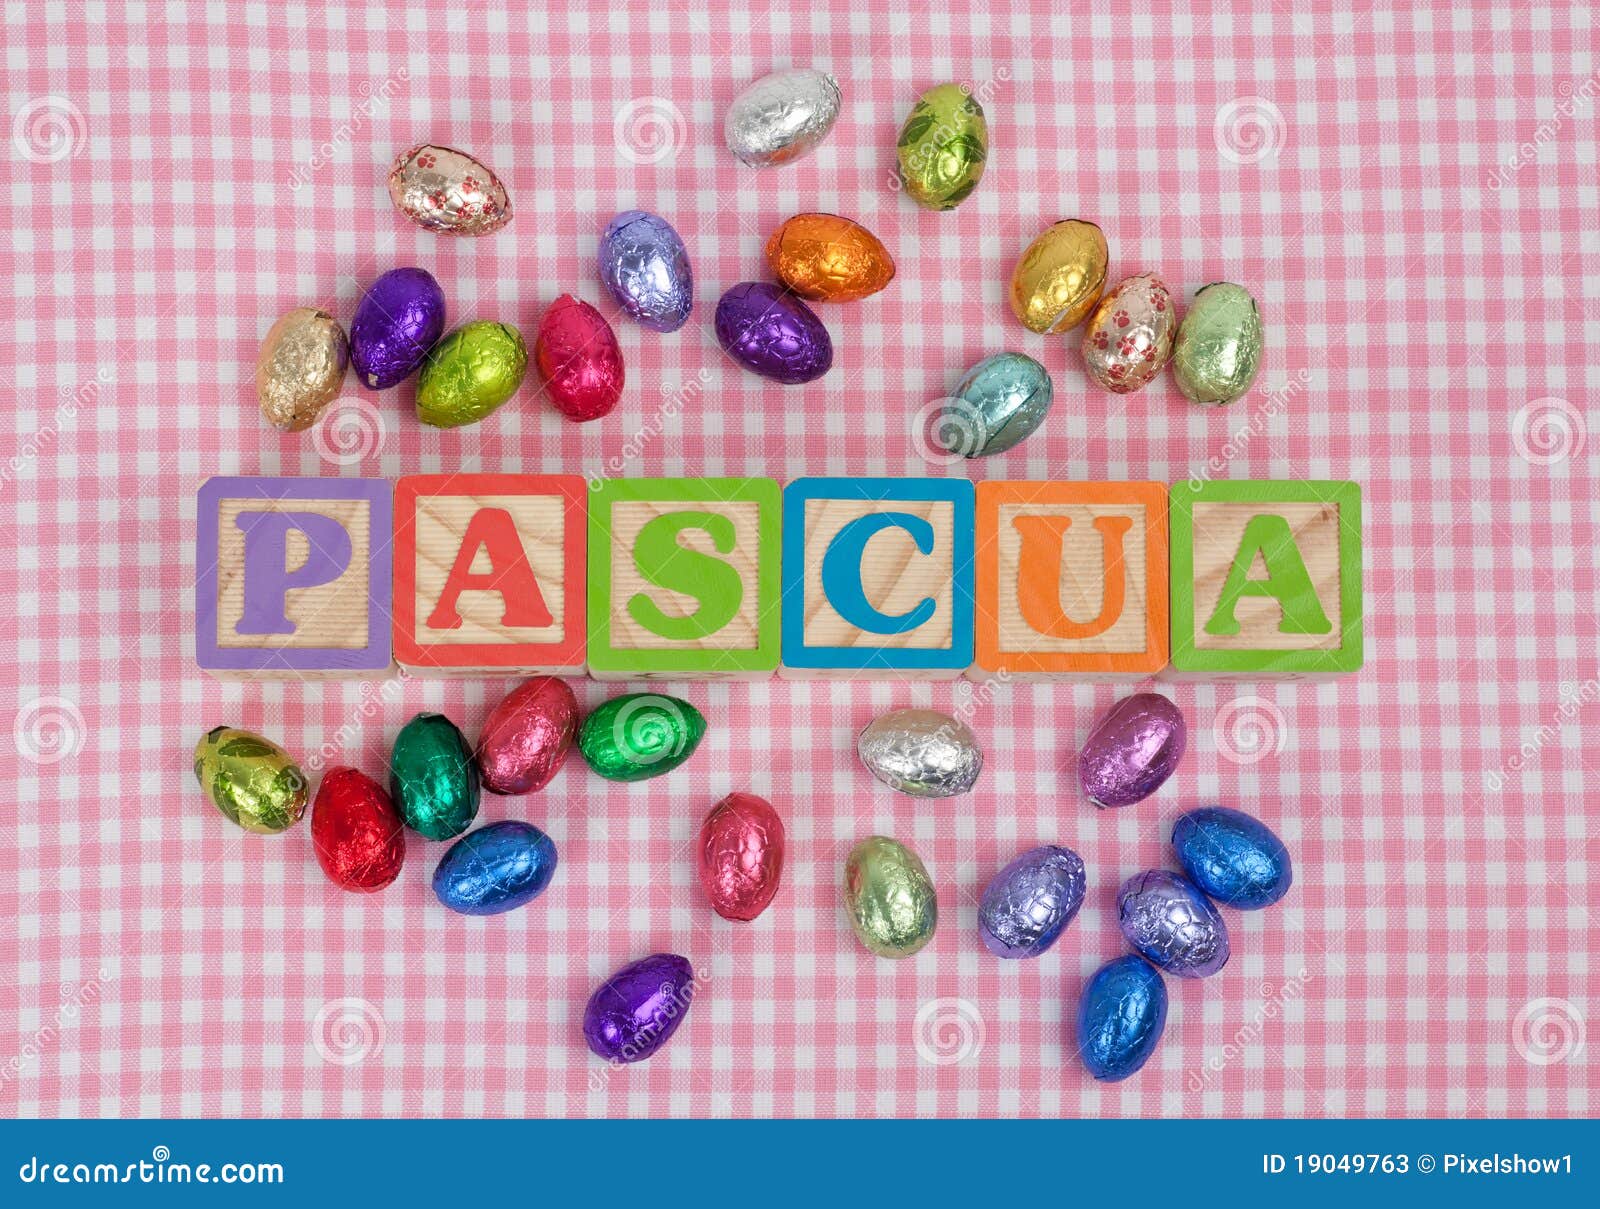 pascua word in wooden block letters